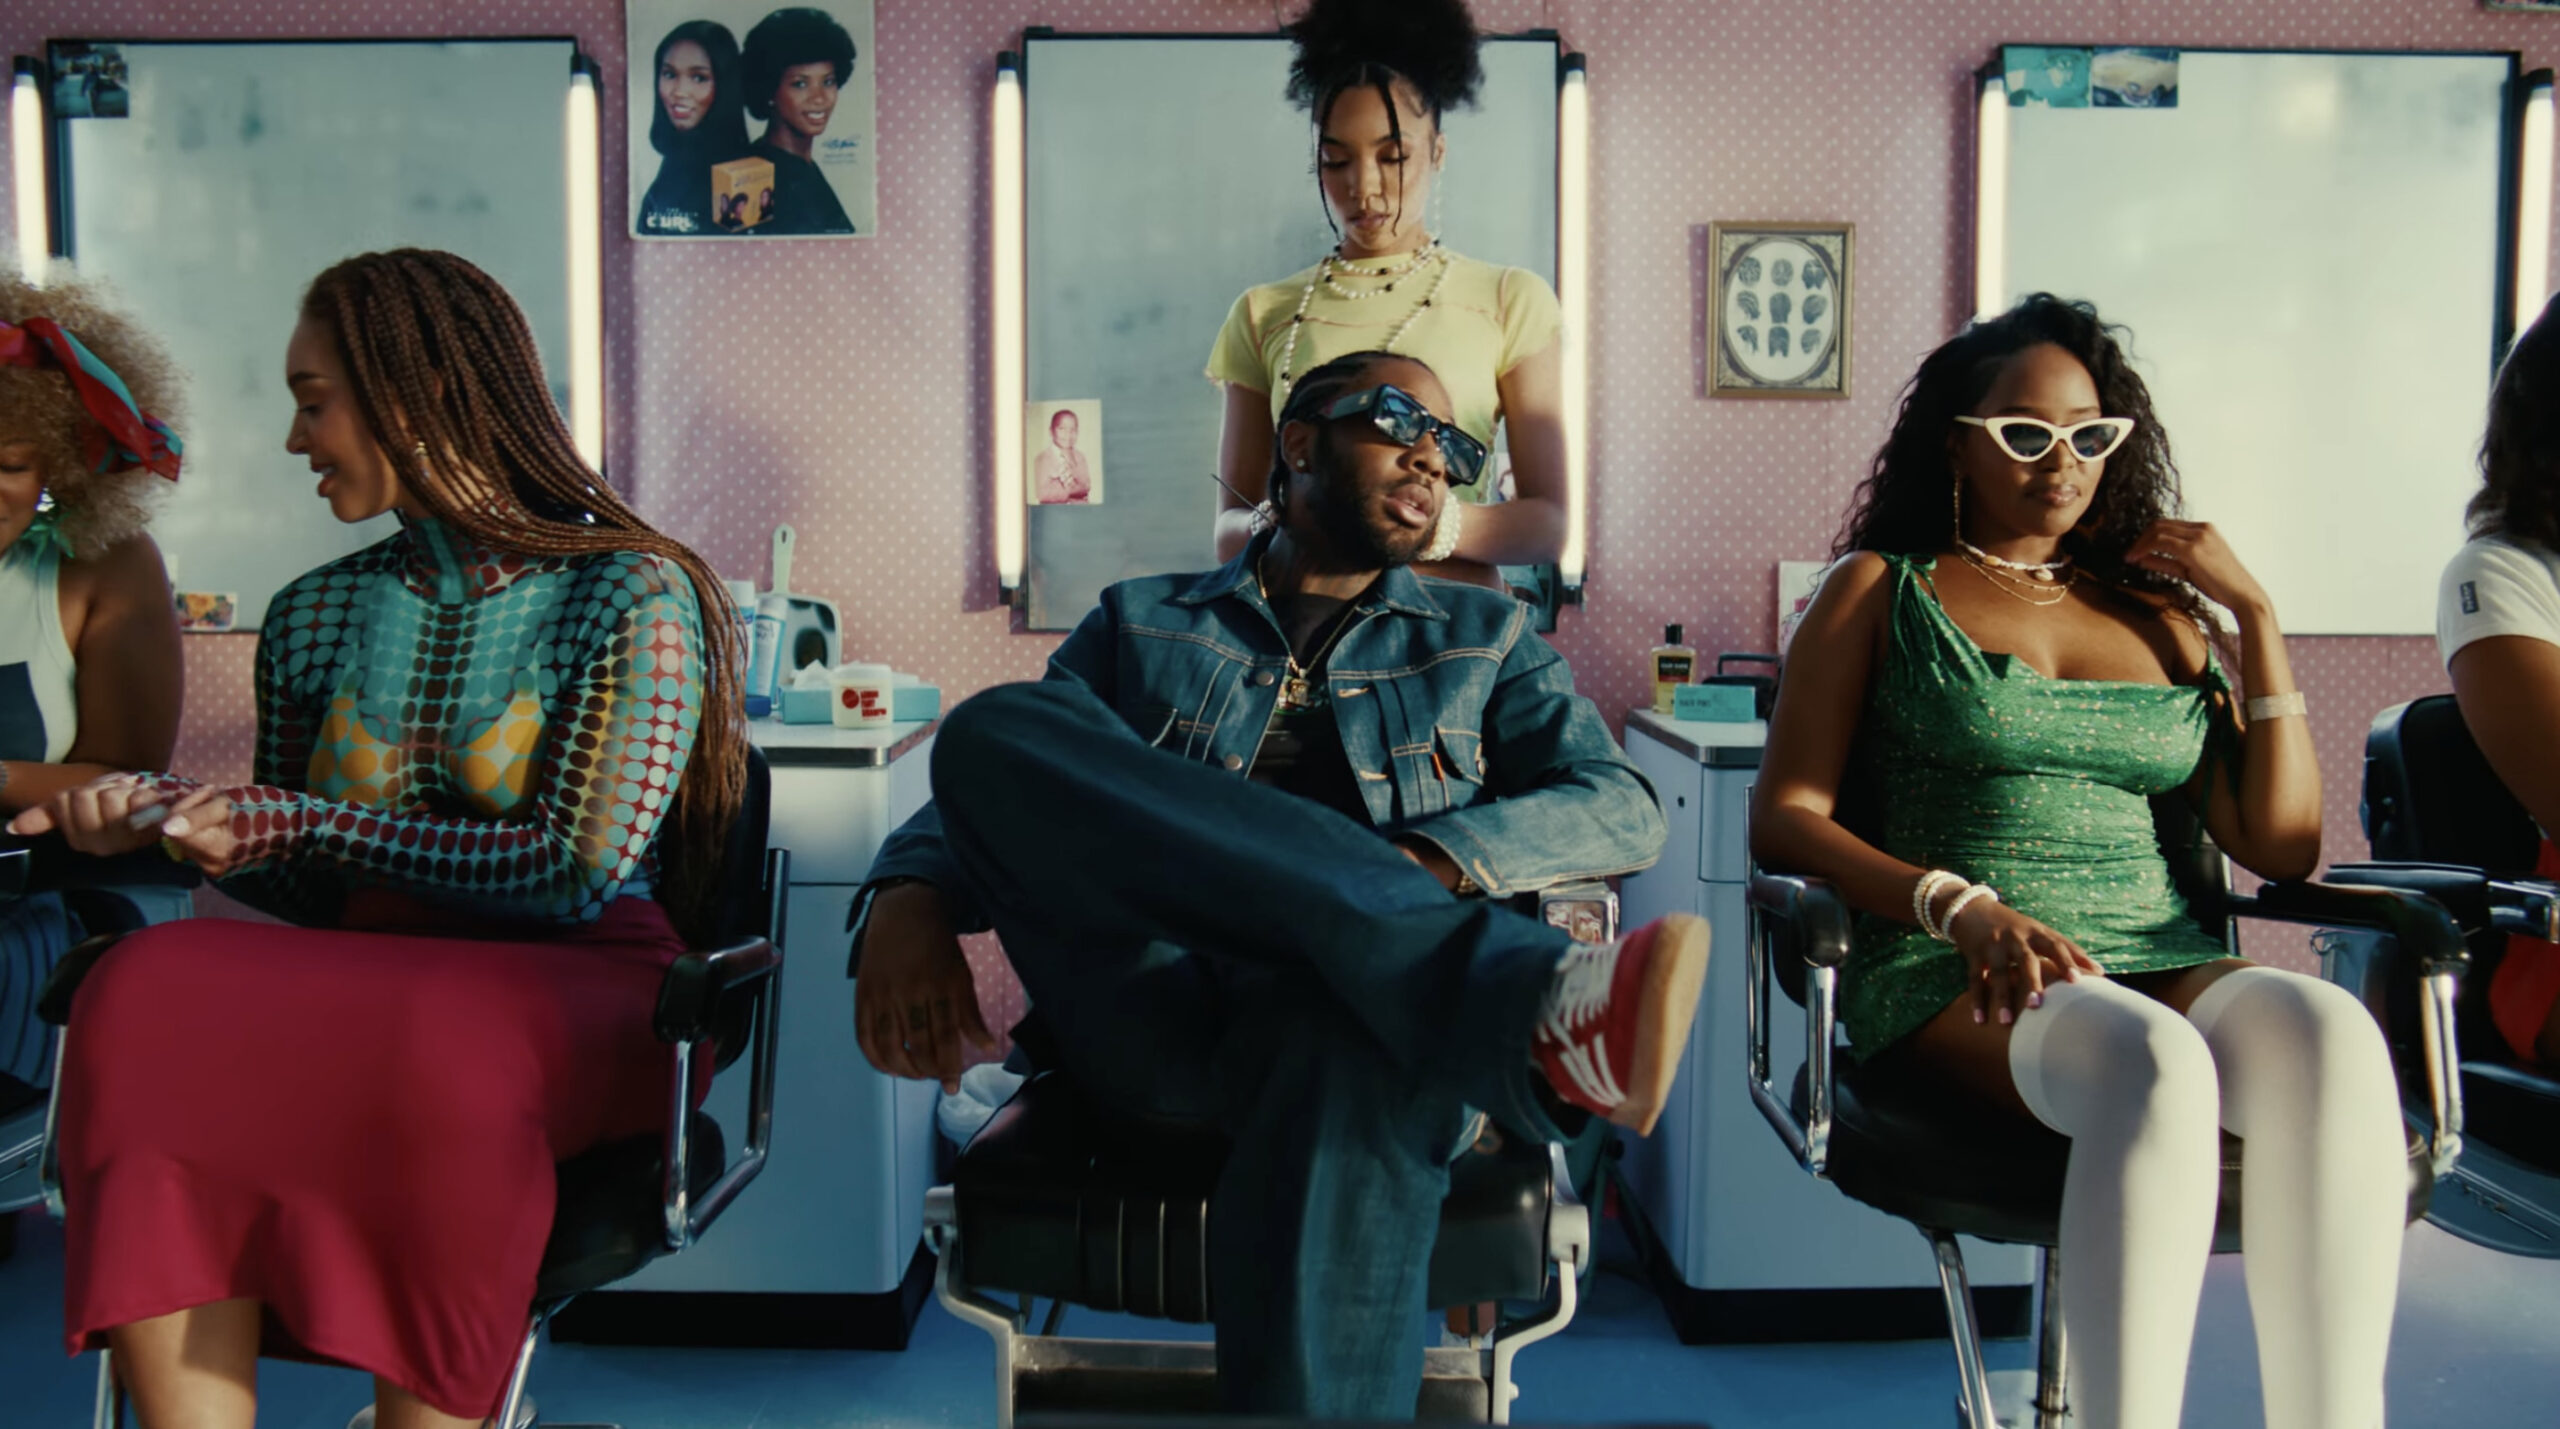 Brent Faiyaz Shows Off His Film Buff Side In “JACKIE BROWN” Music Video